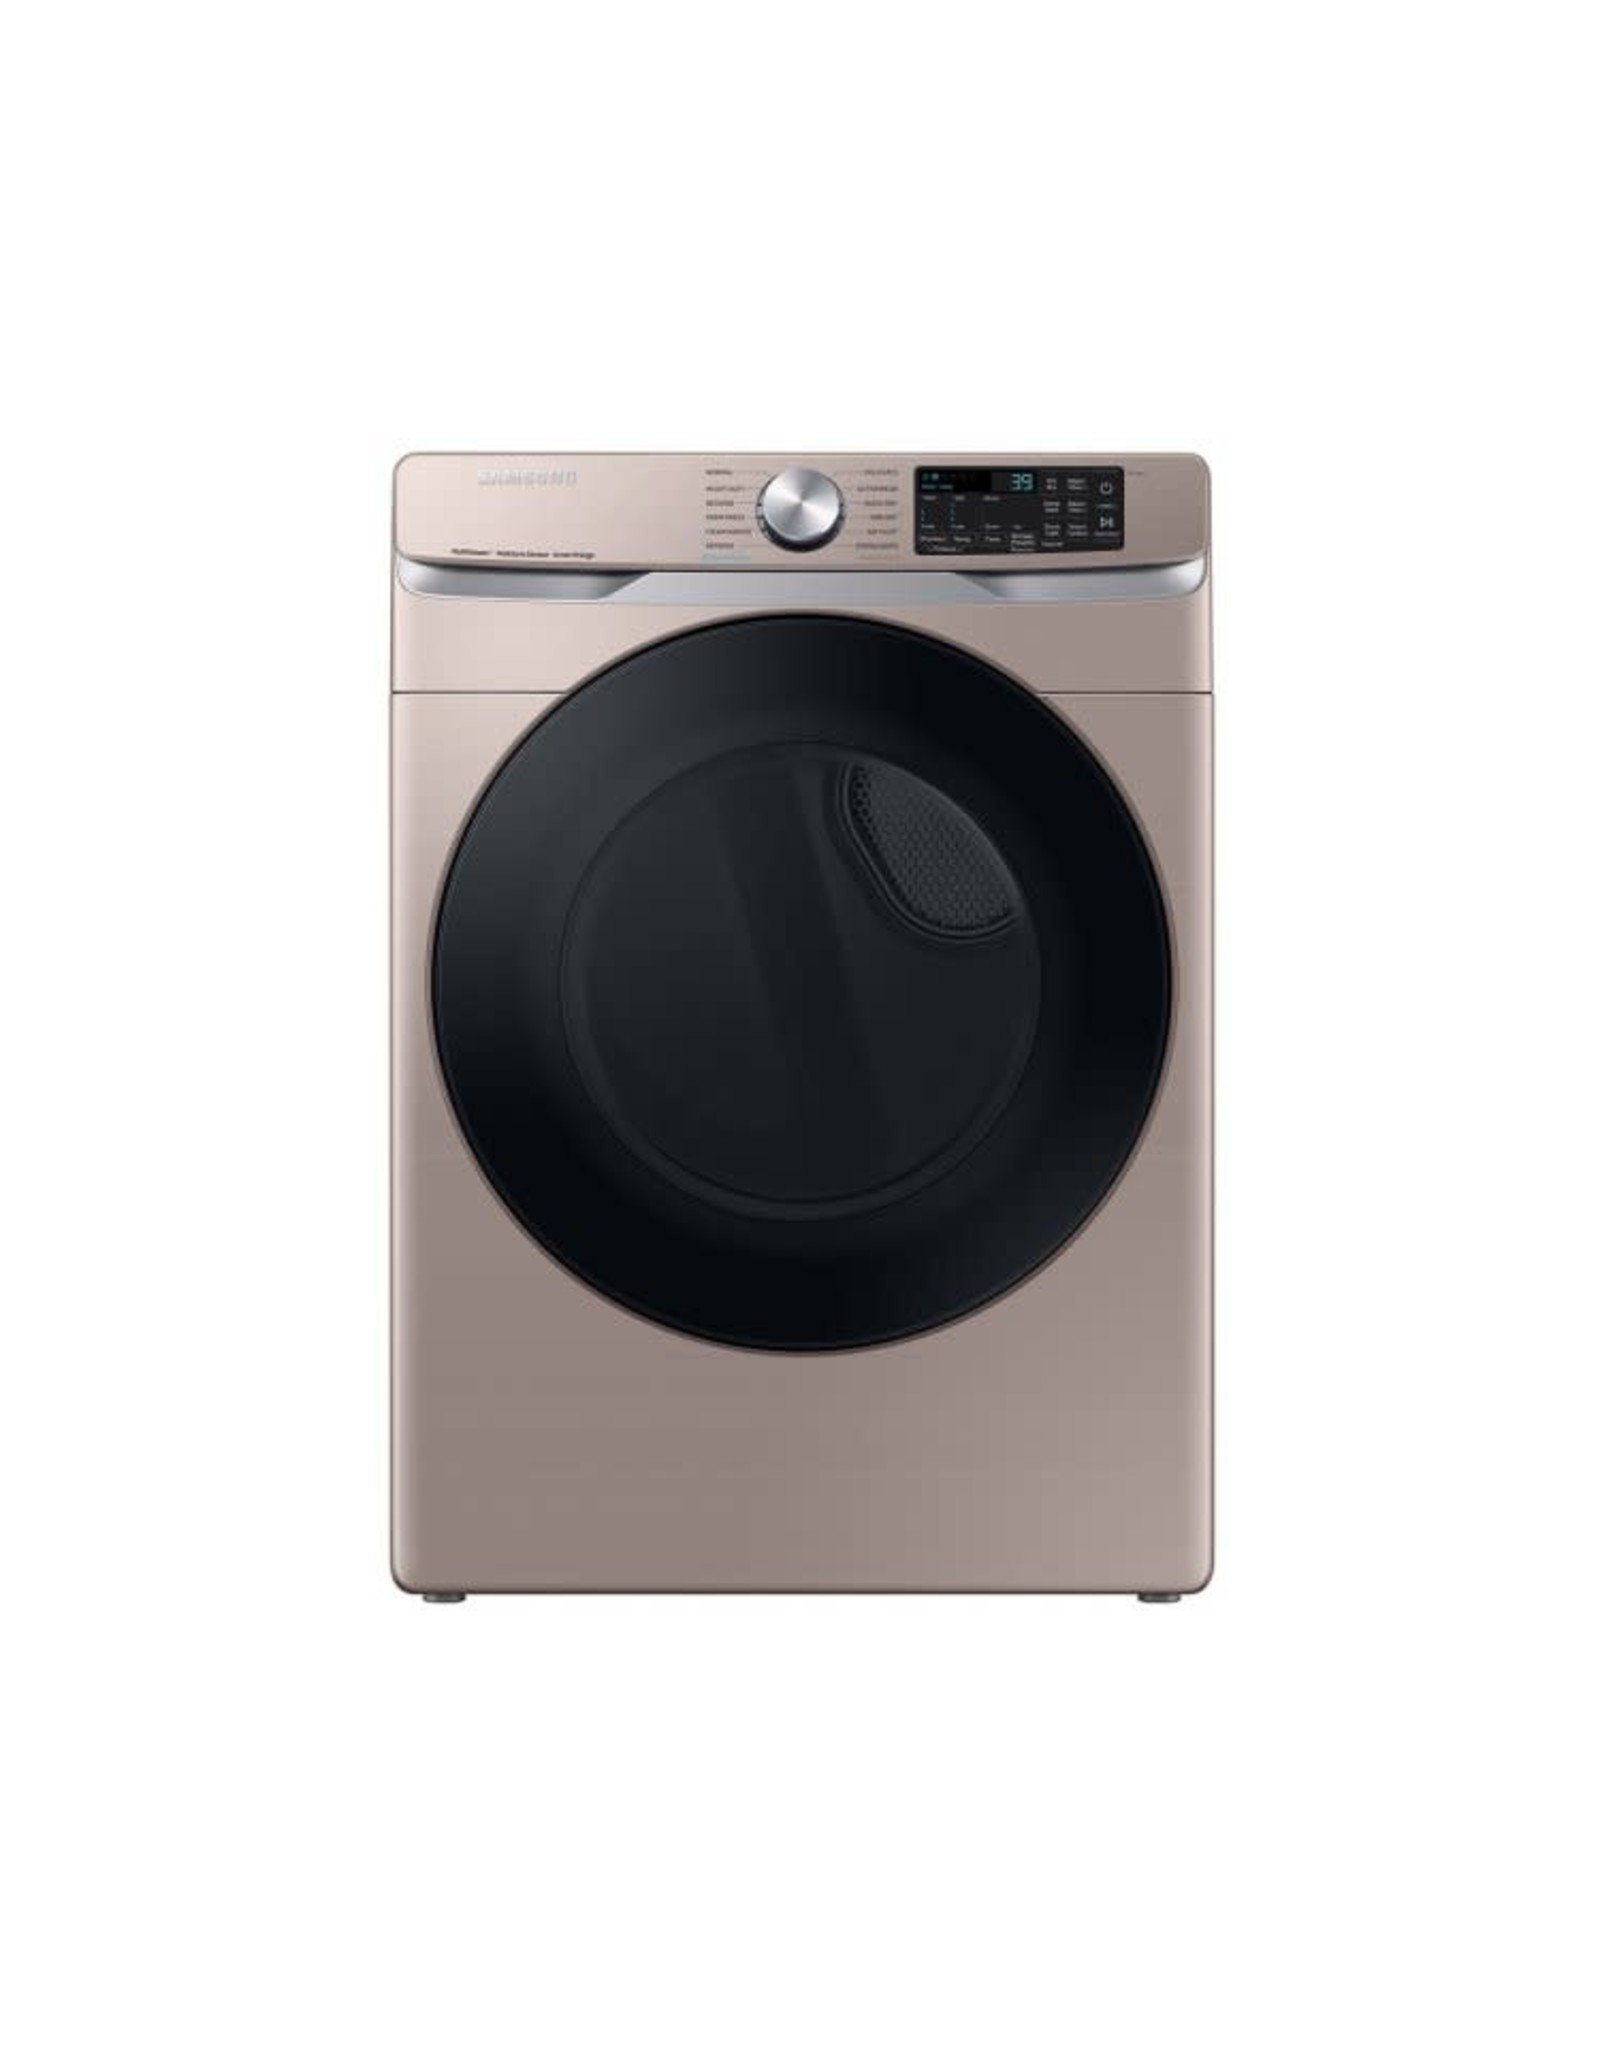 SAMSUNG Copy of DVE45B6300C 27 Inch Electric Smart Dryer with 7.5 Cu.Ft. Capacity, Steam Sanitize+, Sensor Dry, Wi-Fi Connectivity, 21 Dry Cycles, 10 Dry Options, 5 Temperature Settings, Interior Drum Light, Reversible Door, Lint Filter Indicator, 4 Way Venting,